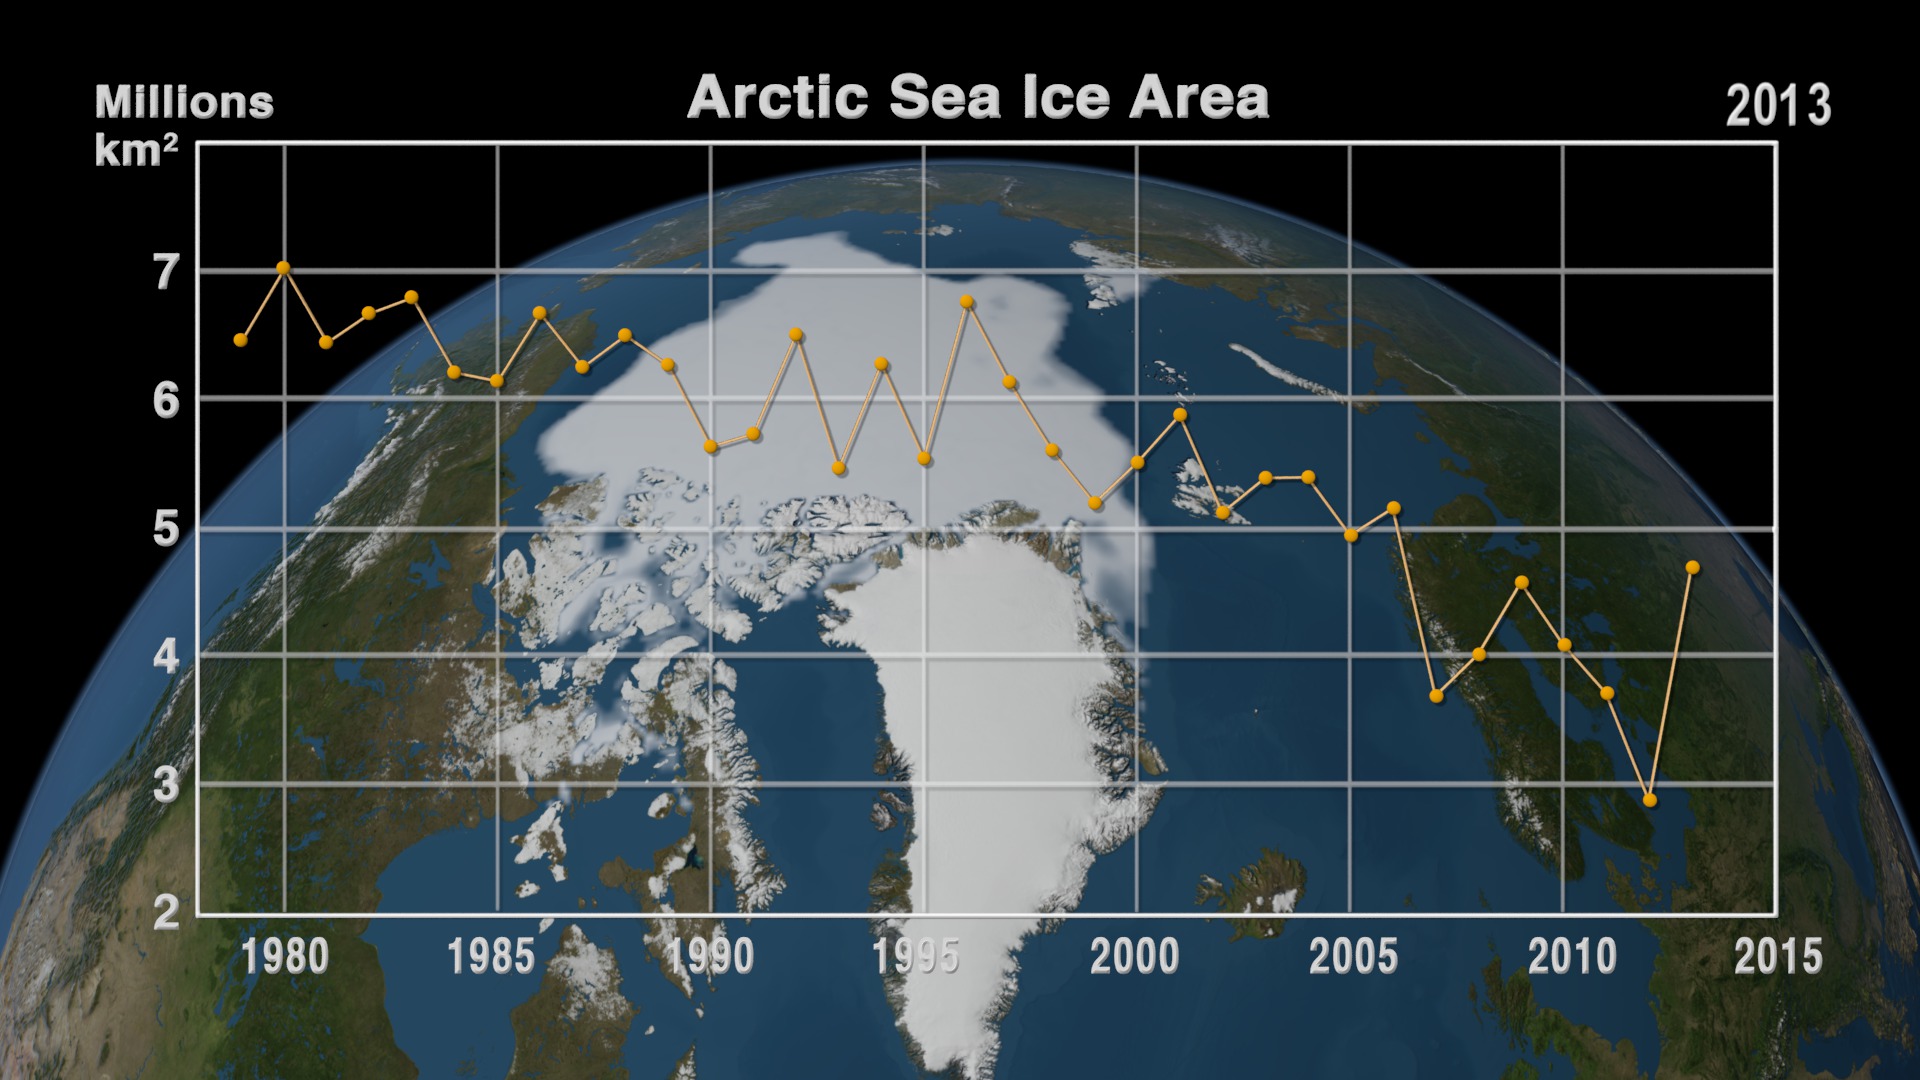 The Earth showing the annual minimum sea ice with a graph overlay showing the annual minimum sea ice area in millions of square kilometers.